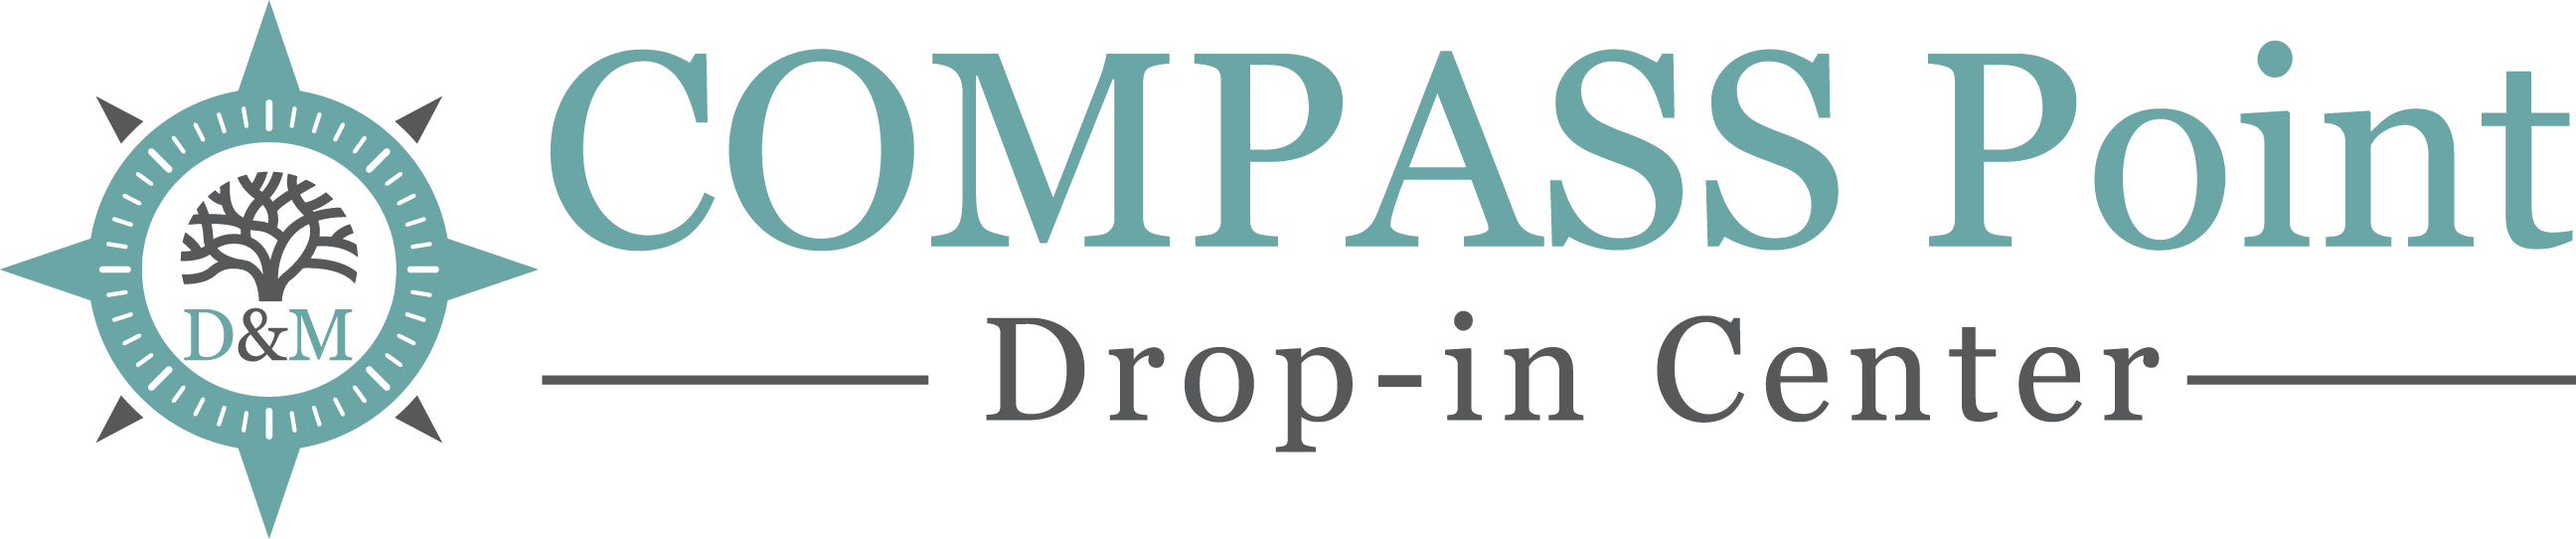 COMPASS Point Drop-In Center